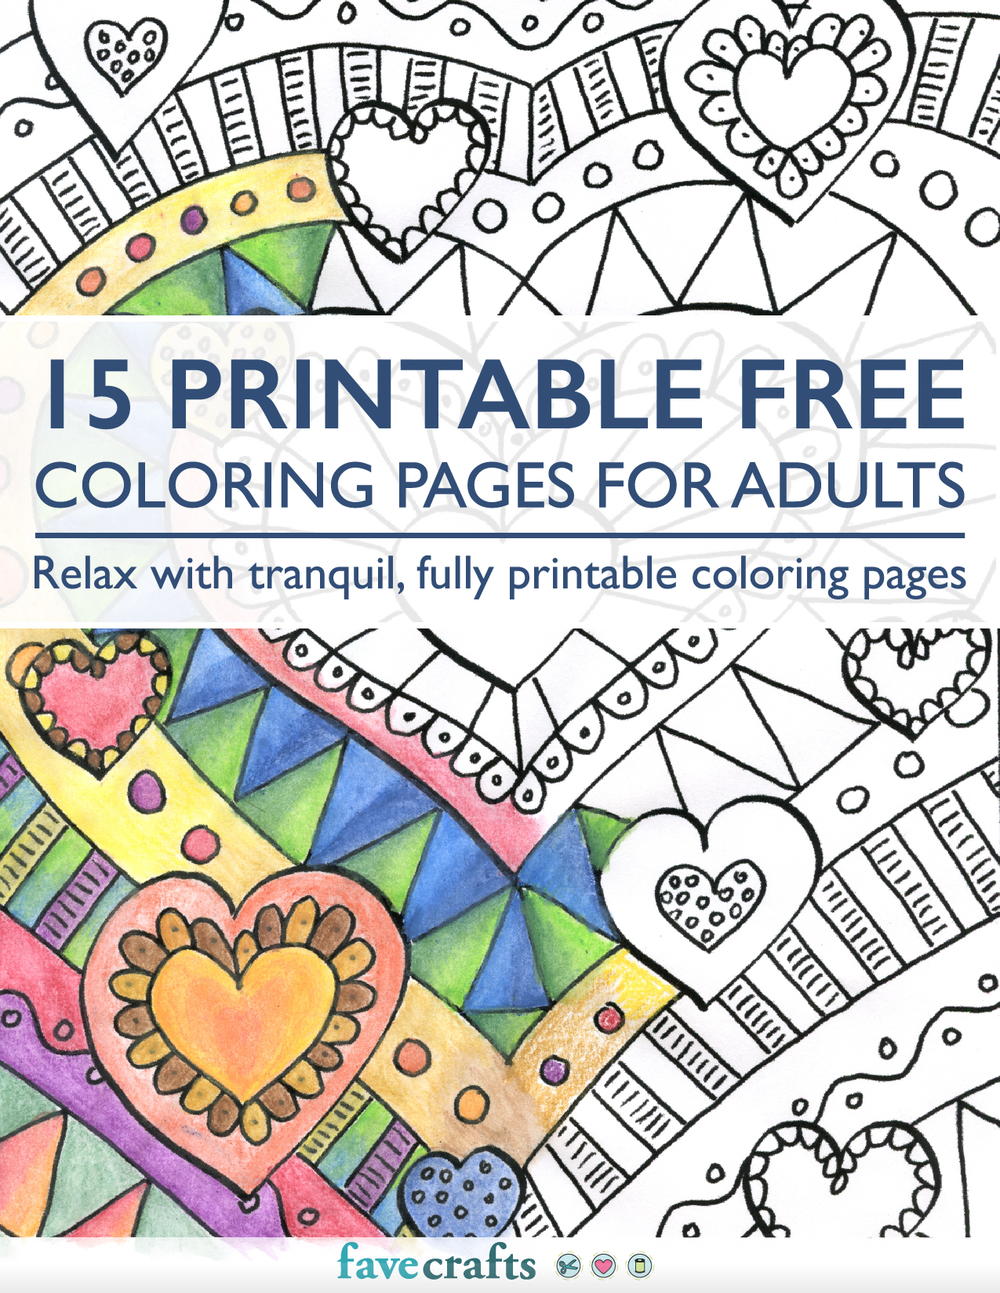 Printable free coloring pages for adults pdf